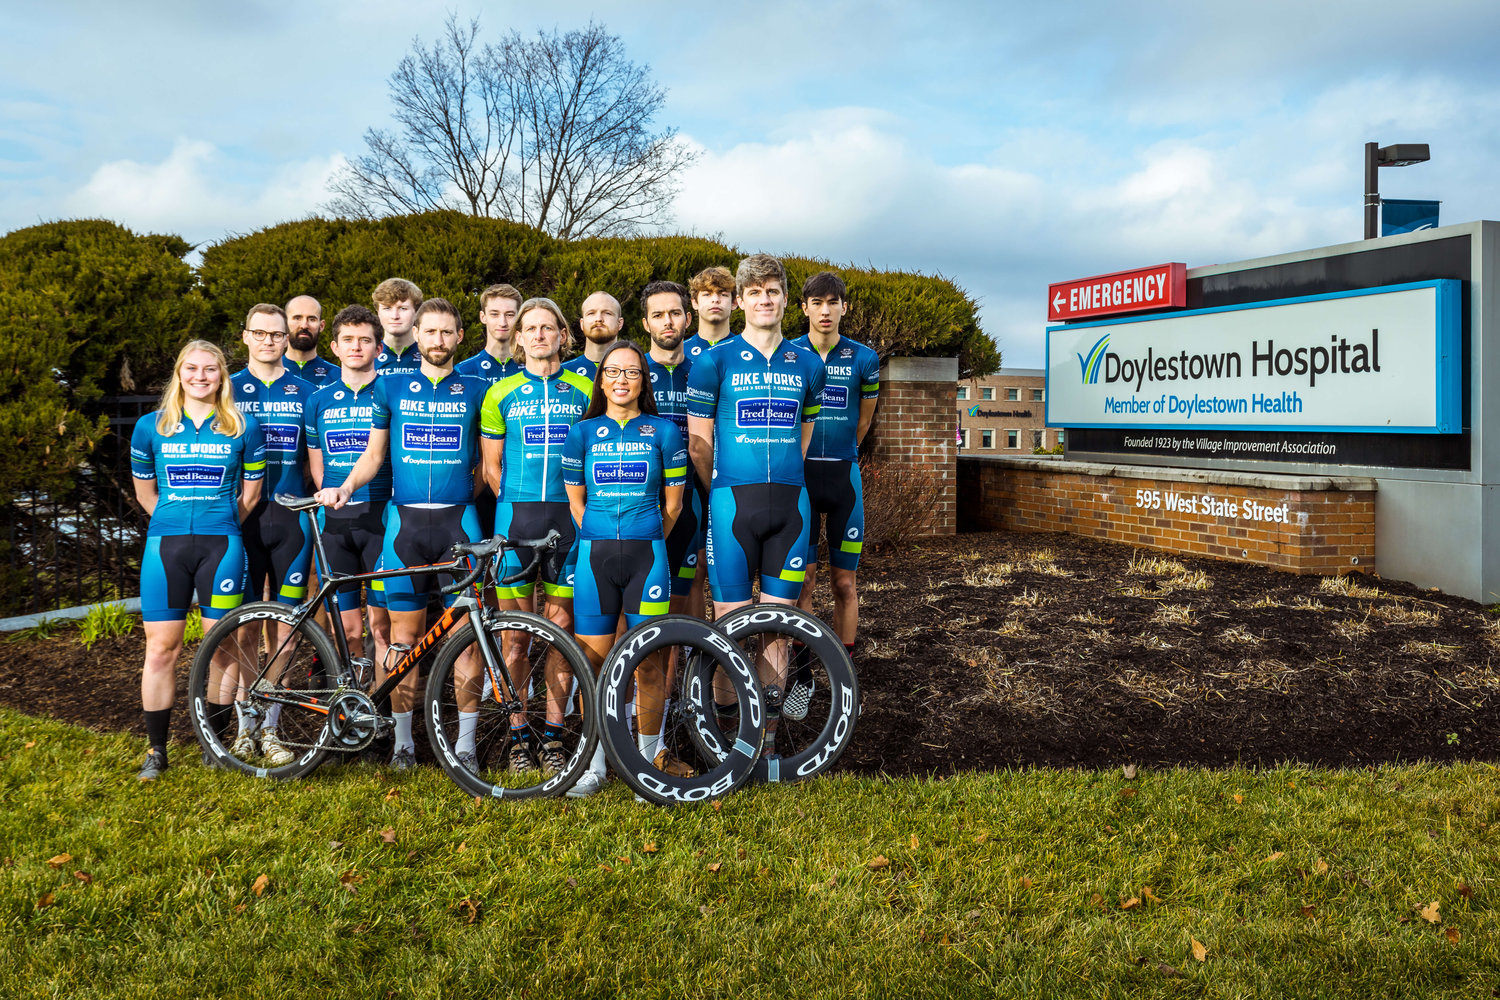 Doylestown Health sponsors the Bike Works professional cycling team in concert with the team’s mission to promote active, healthy lifestyles.